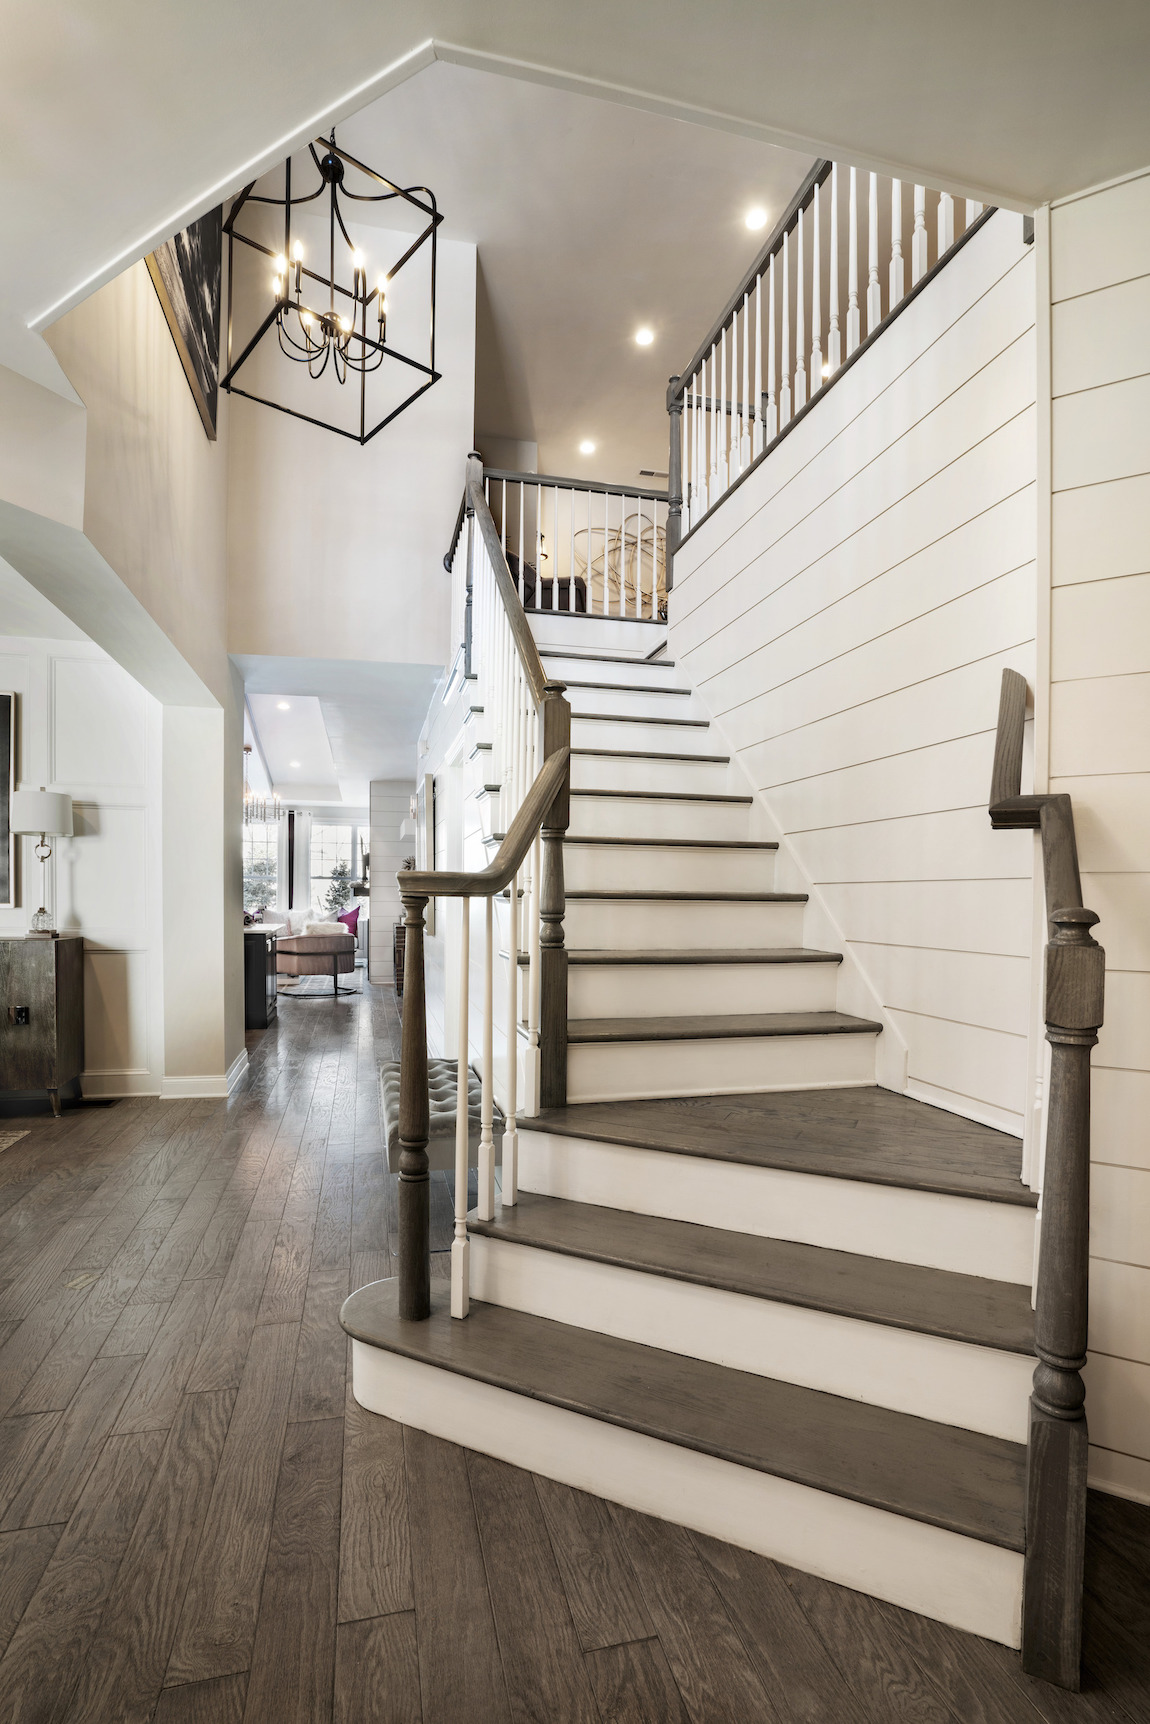 Curved staircase with shiplap siding in a foyer.